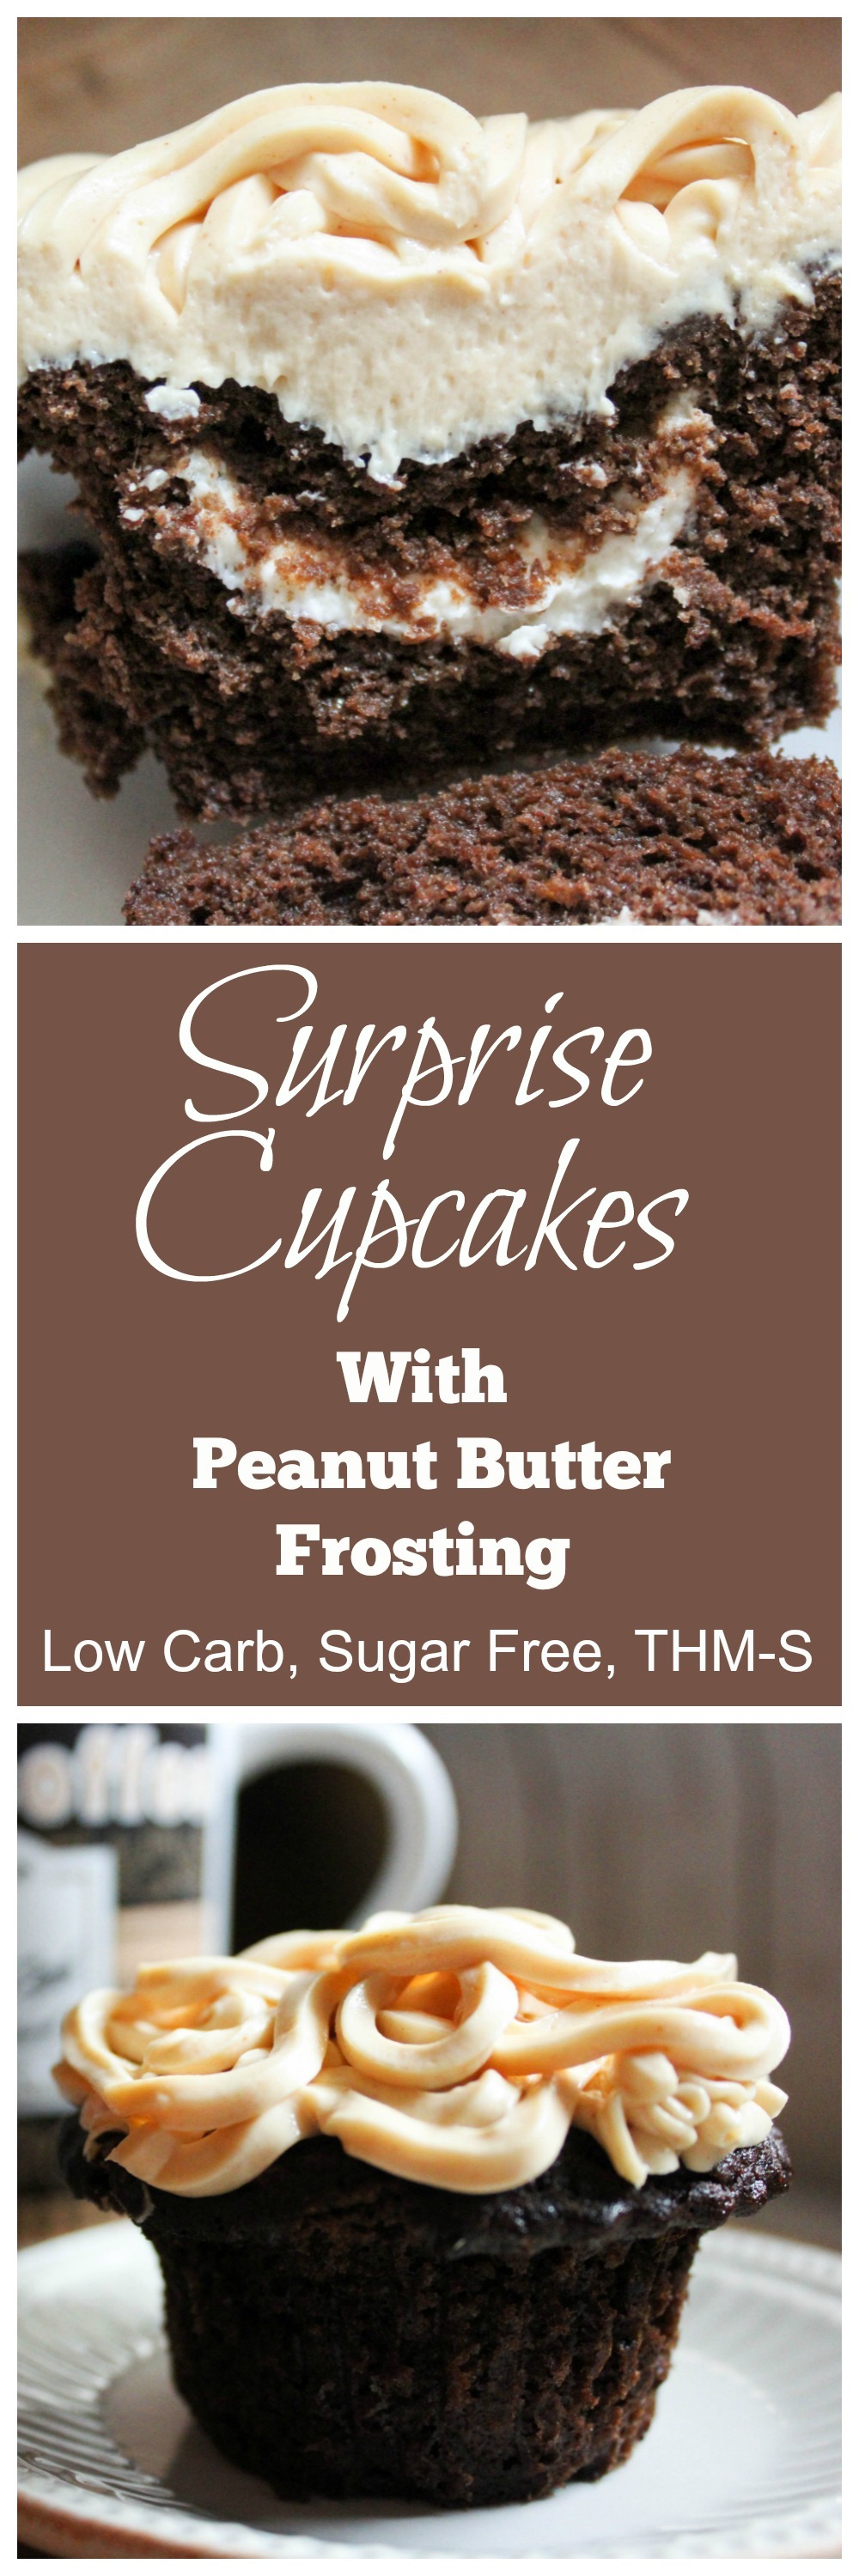 Surprise Cupcakes with Peanut Butter Frosting (THM-S, Low Carb, Sugar Free, Gluten Free)